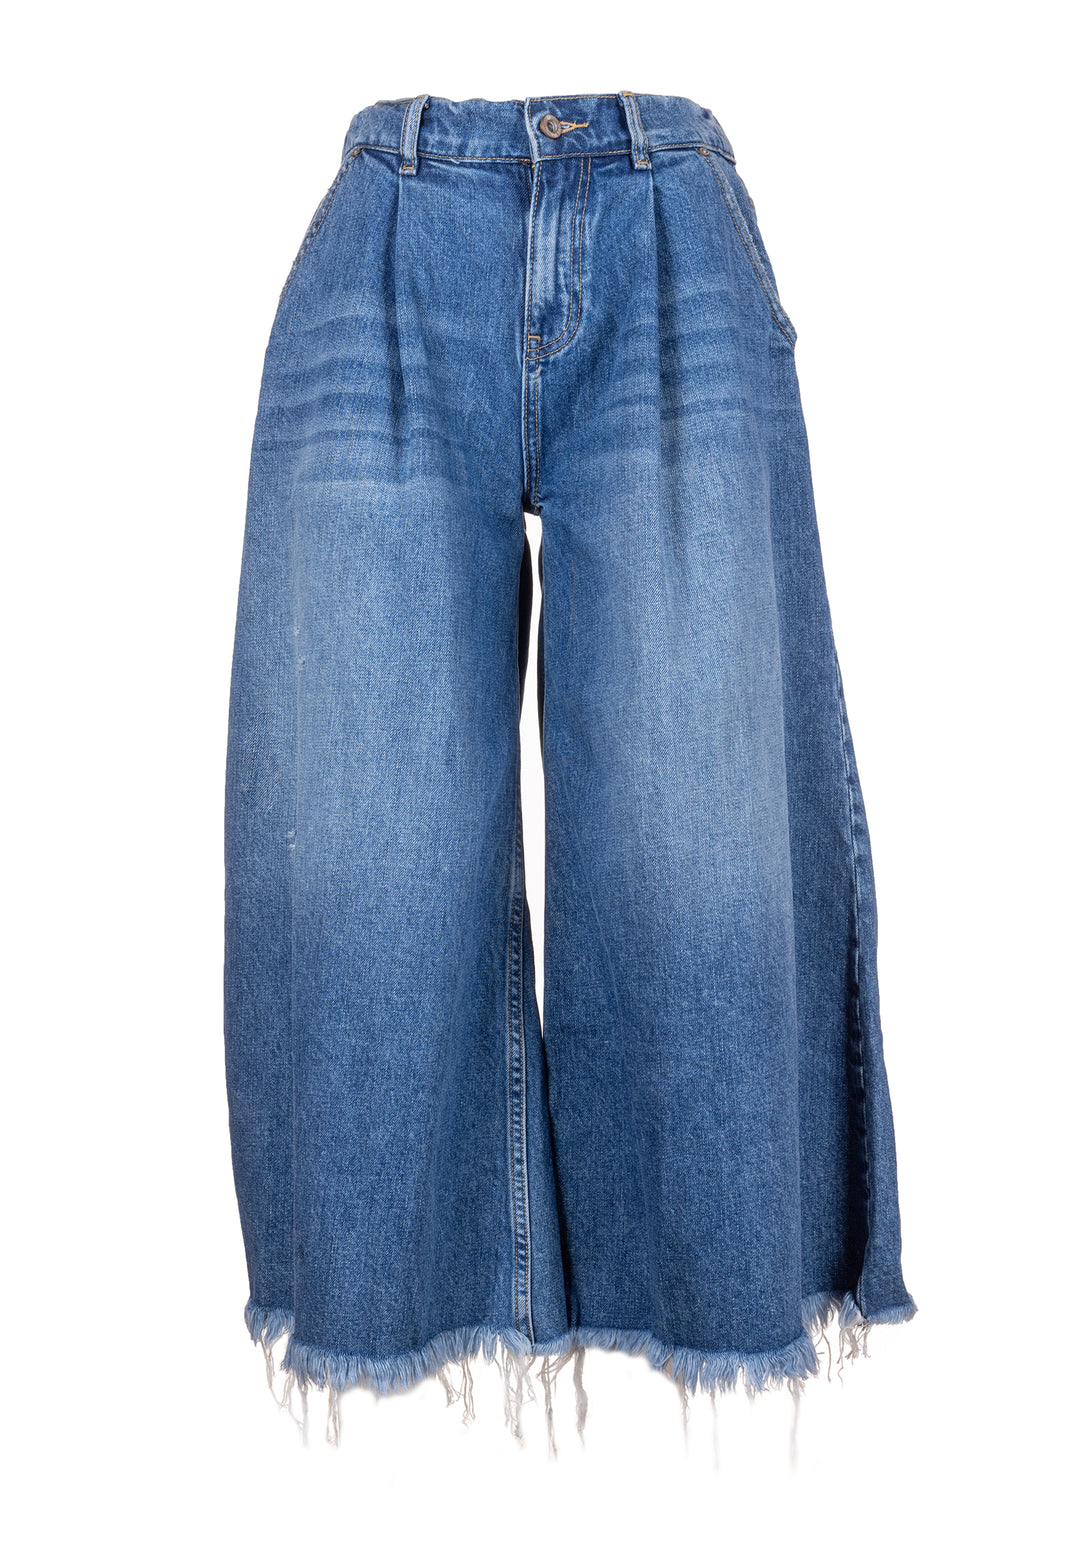 Pant cropped wide fit made in denim with vintage wash